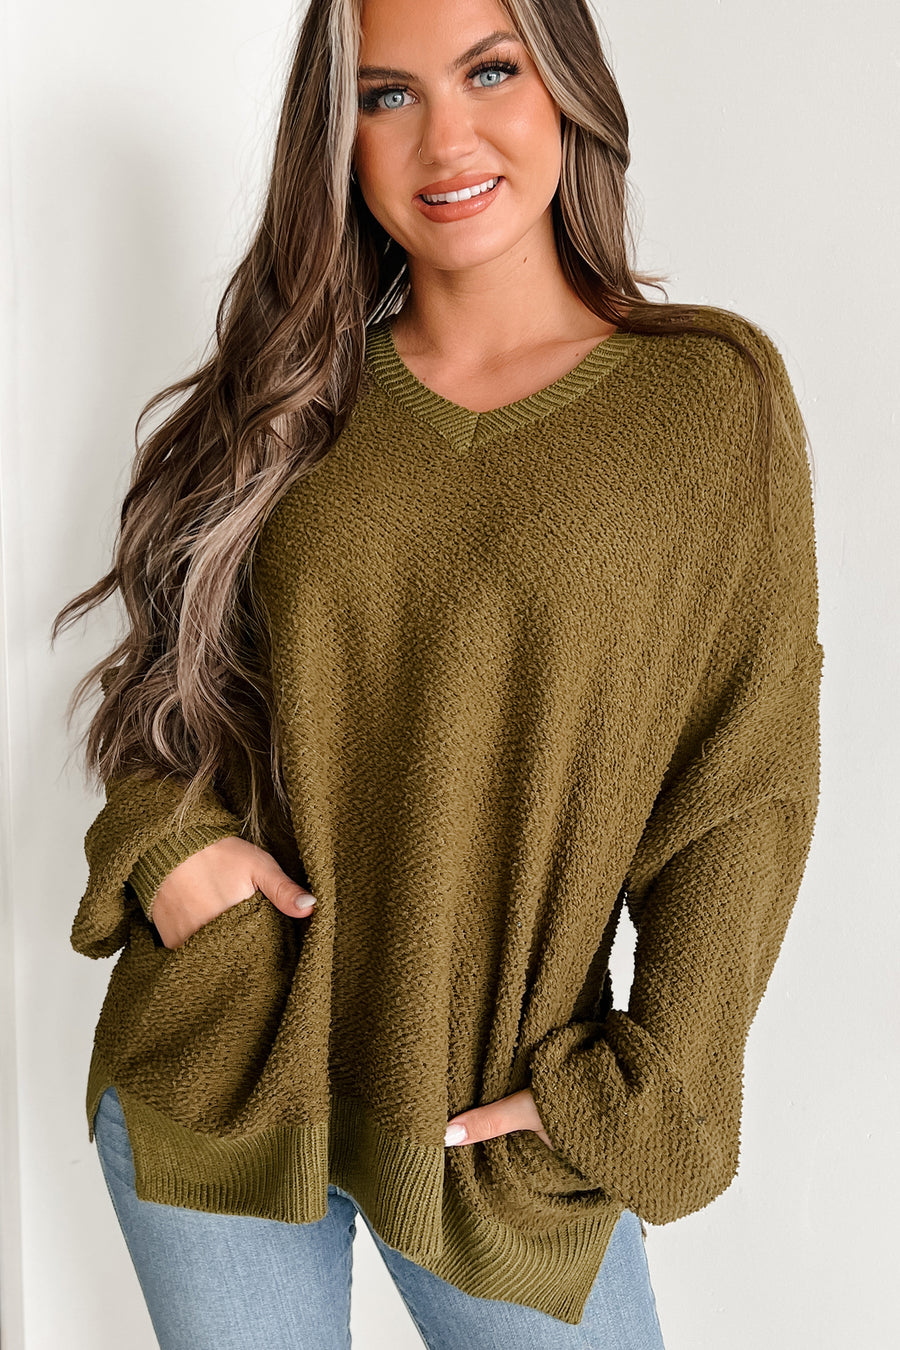 Sincerely Snuggly Hooded Popcorn Texture Sweater (Olive) - NanaMacs